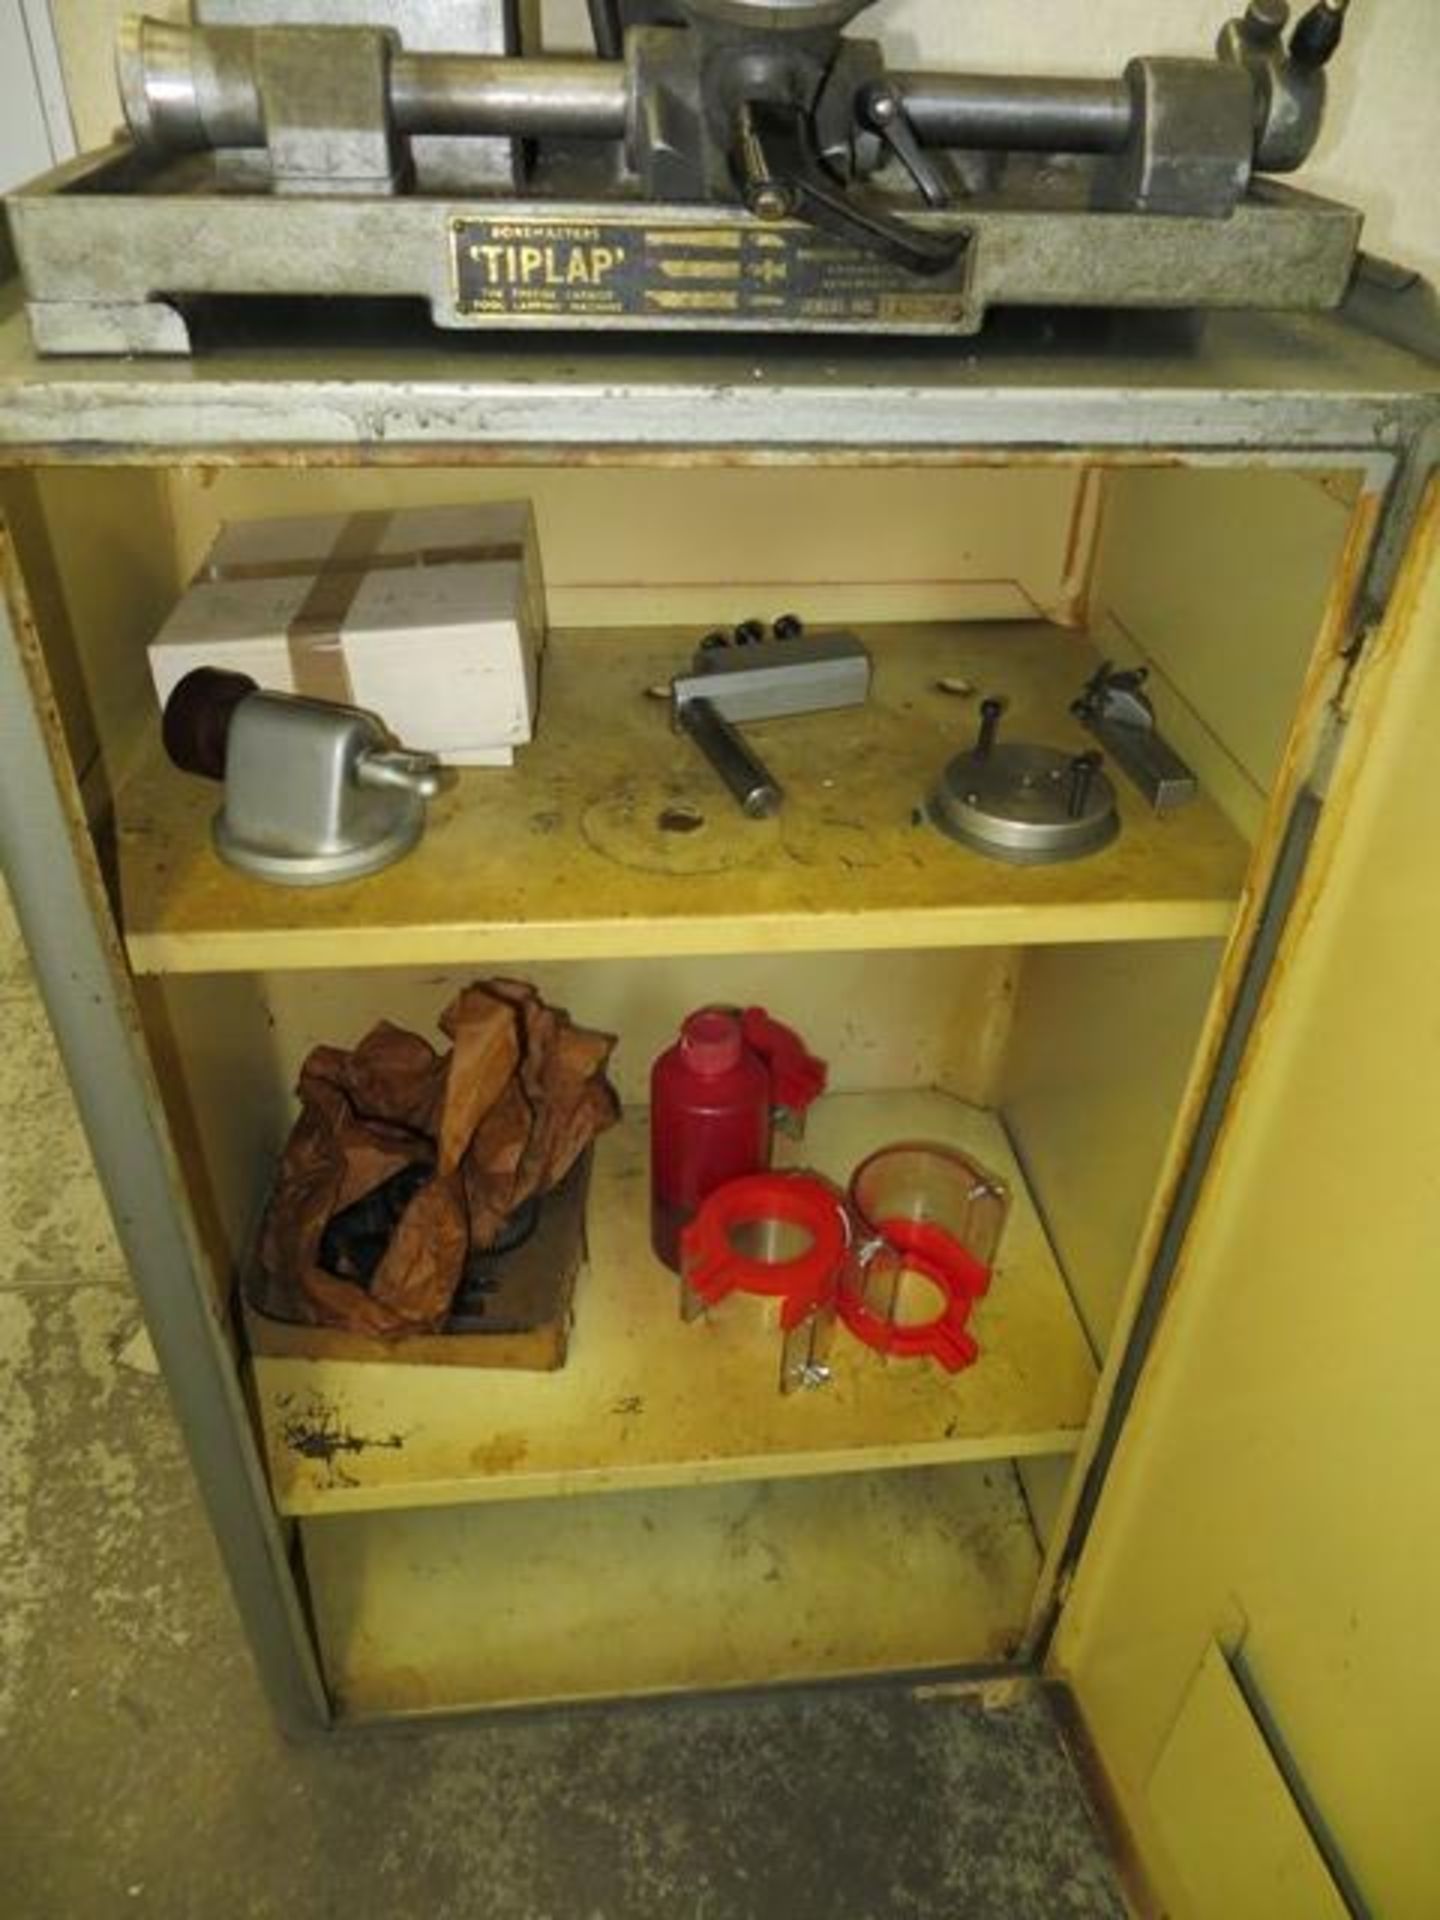 Tiplap grinder with diamond wheel s/n TLL750 240v c/w tool chest and contents - Image 3 of 3